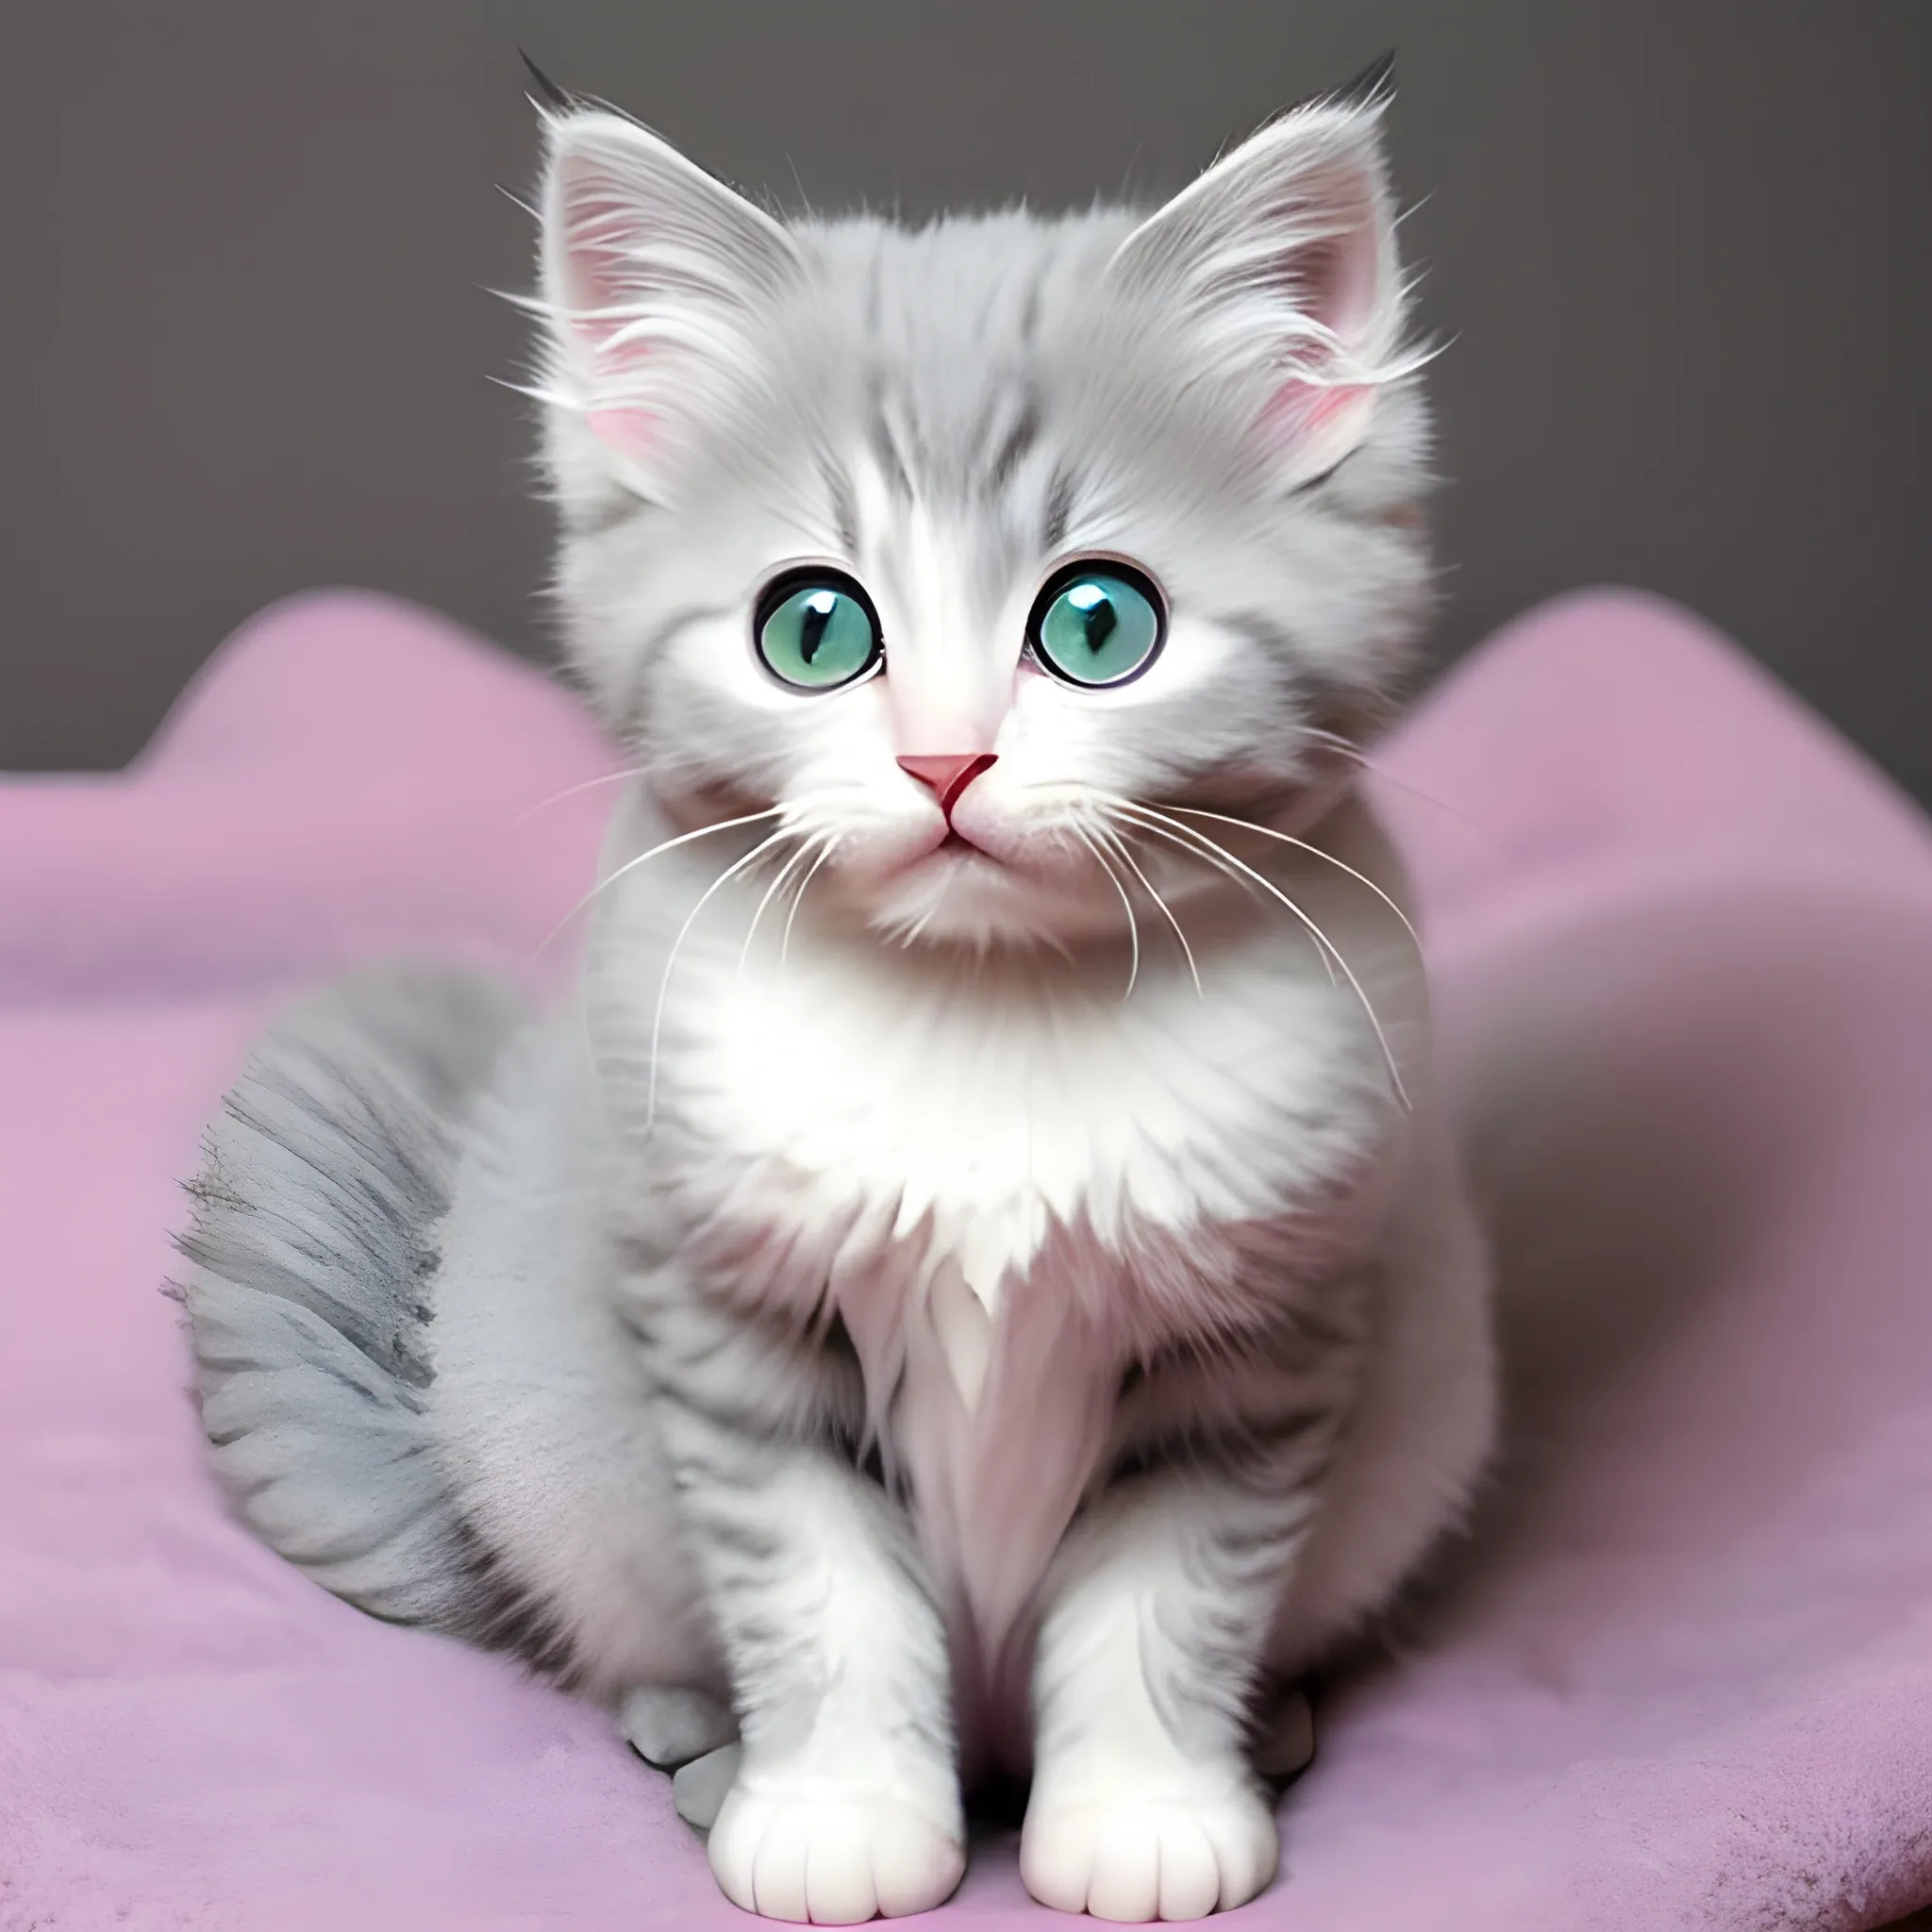 


The image features a fluffy, gray-and-white kitten with big, round eyes and delicate pink ears. The kitten is sitting on a soft, knitted blanket, its tiny paws tucked neatly under its body. Its whiskers are twitching with curiosity as it gazes intently at something just out of frame. The kitten's fur is so soft and plush that you can almost feel the texture through the screen. With a playful tilt of its head and a sweet, innocent expression, this adorable cat is sure to melt the hearts of anyone who sees it.





